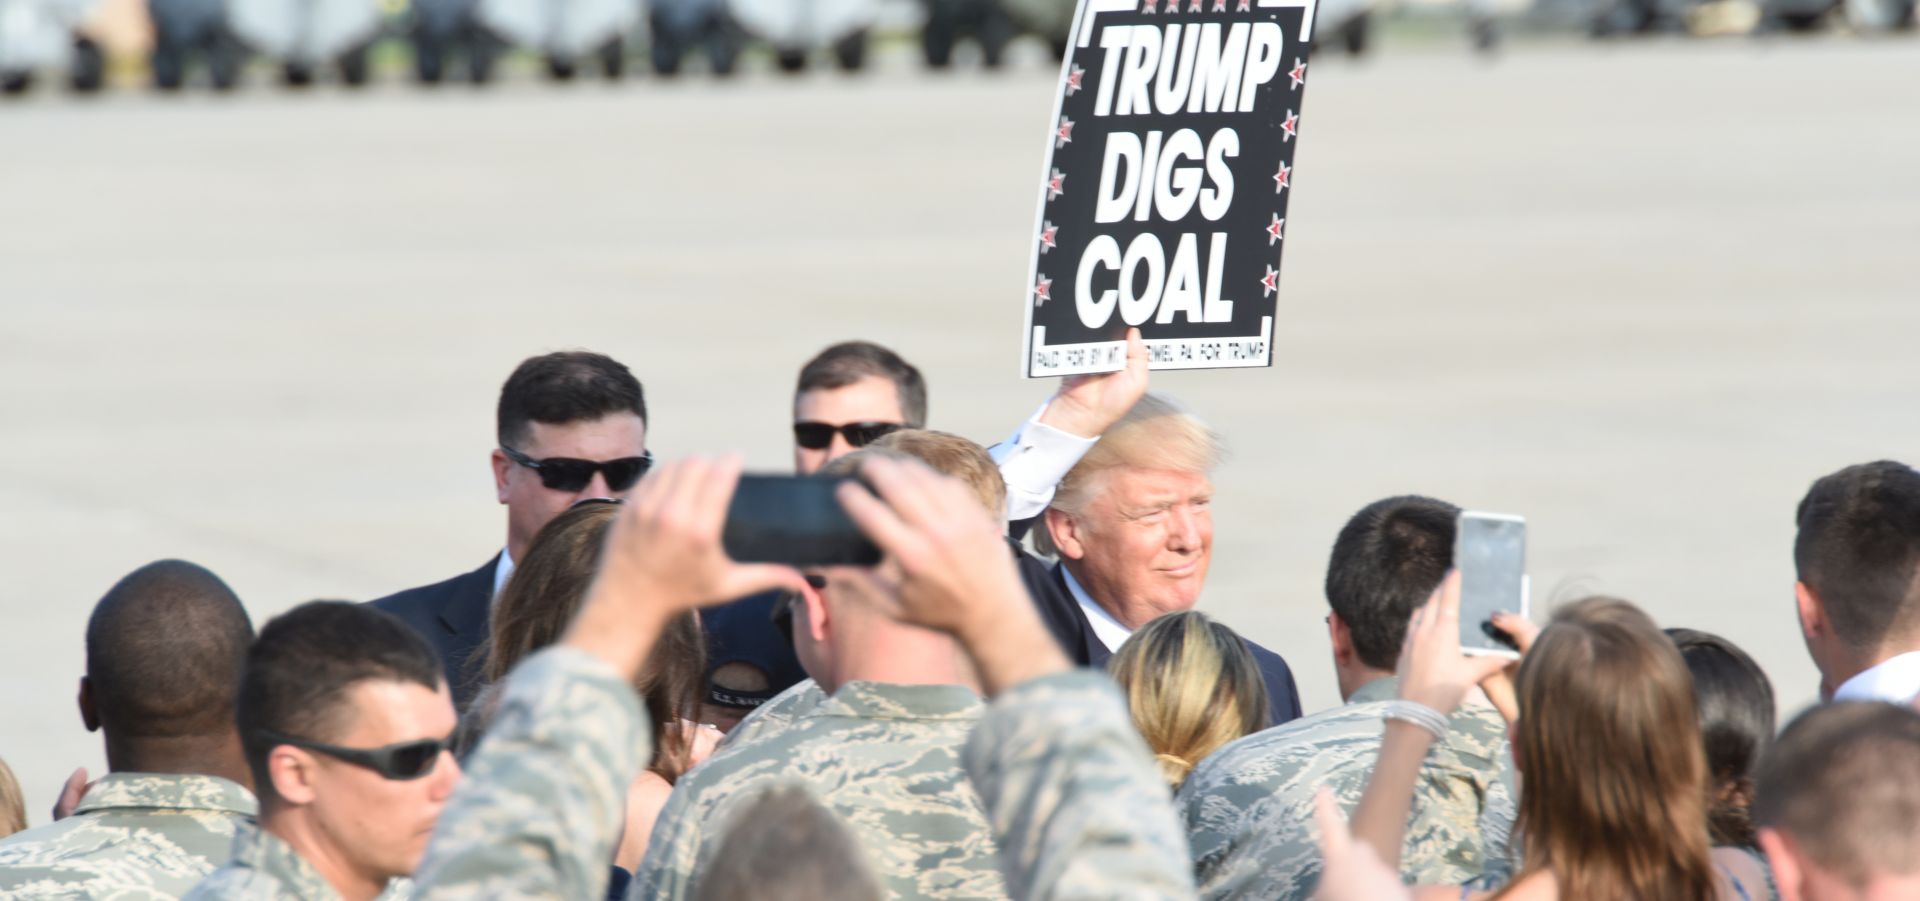 Trump holds a sign "Trump digs coal" surrounded by people taking pictures (U.S. Air National Guard Photo by Master Sgt. Culeen Shaffer/Released)